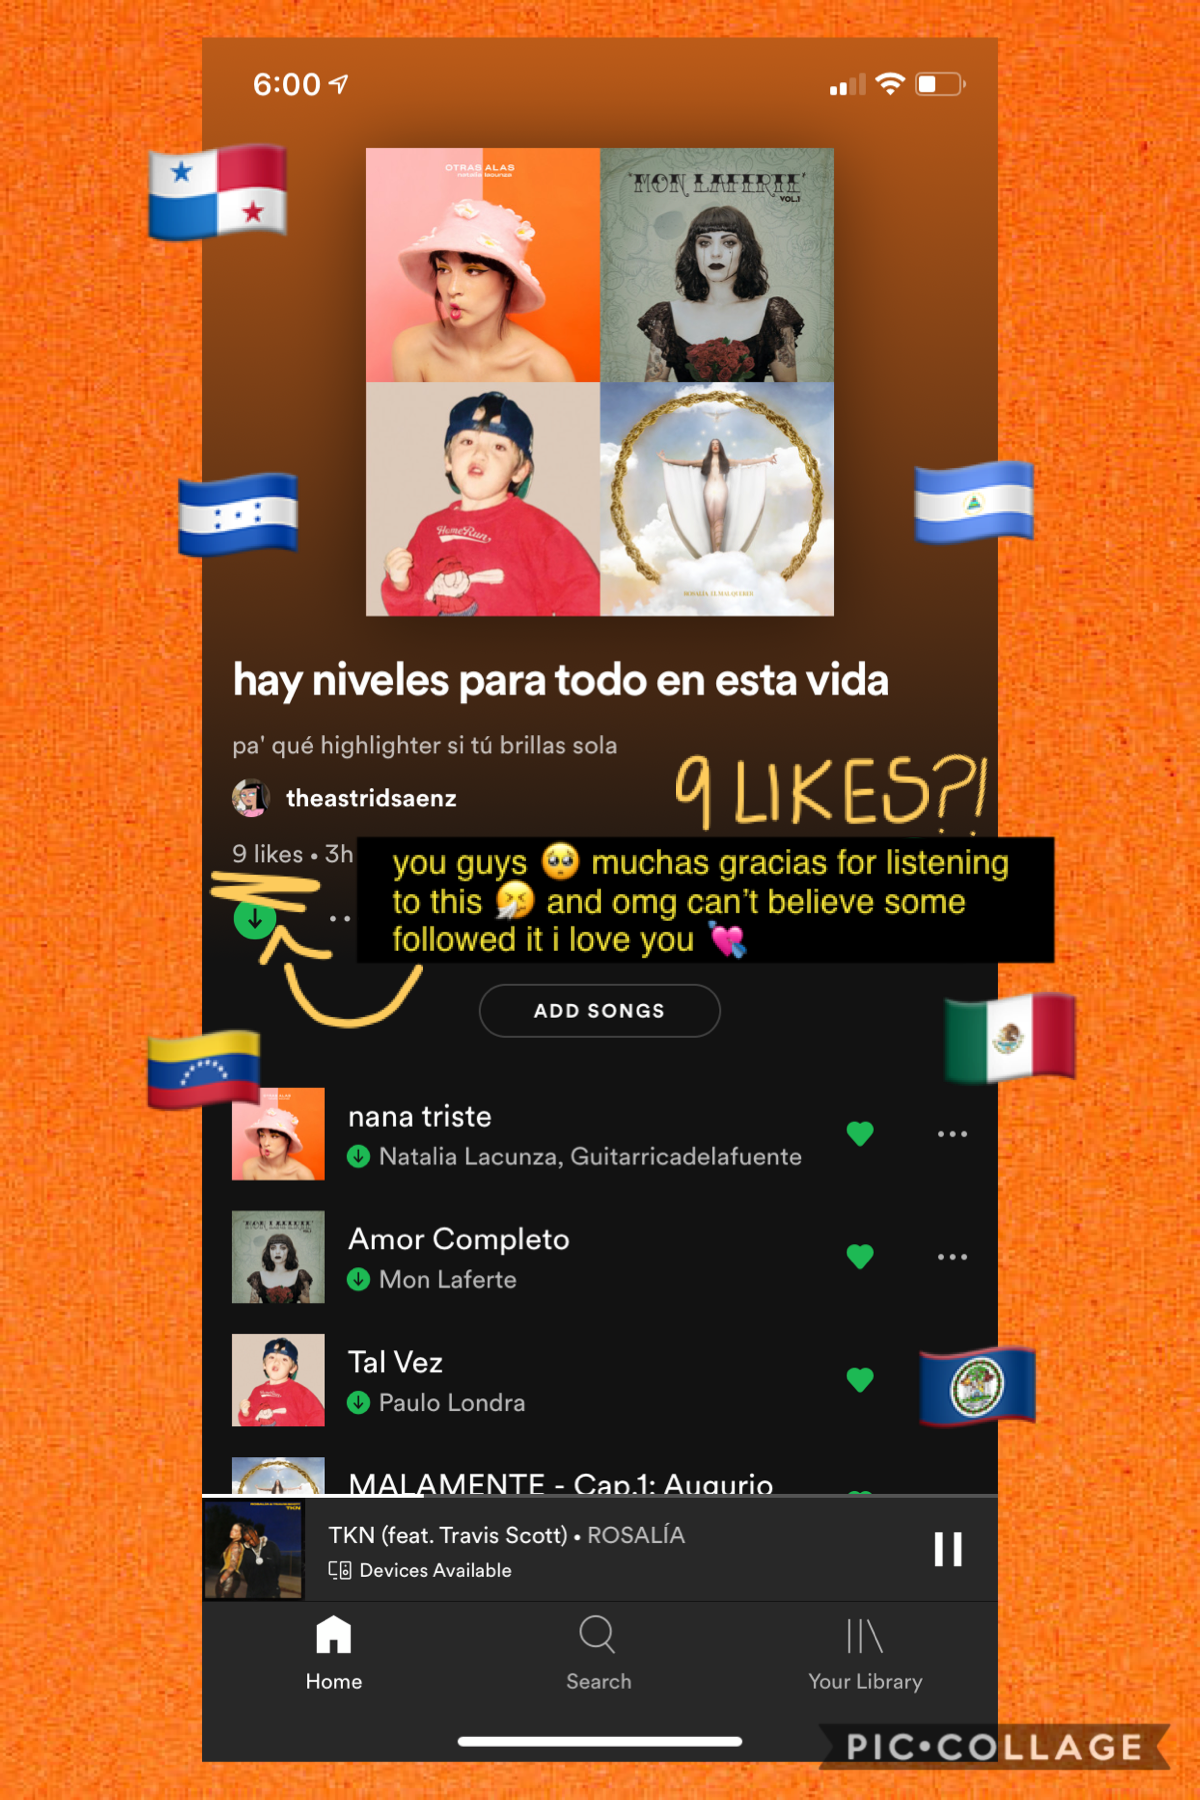 tysm to those who’ve checked it out, you’ve a girl really really happy 😭🤯💘💘 —“hay niveles para todo en esta vida” means “there’s levels for everything in life” 😌🦋 spotify: @theastridsaenz 🥺💗